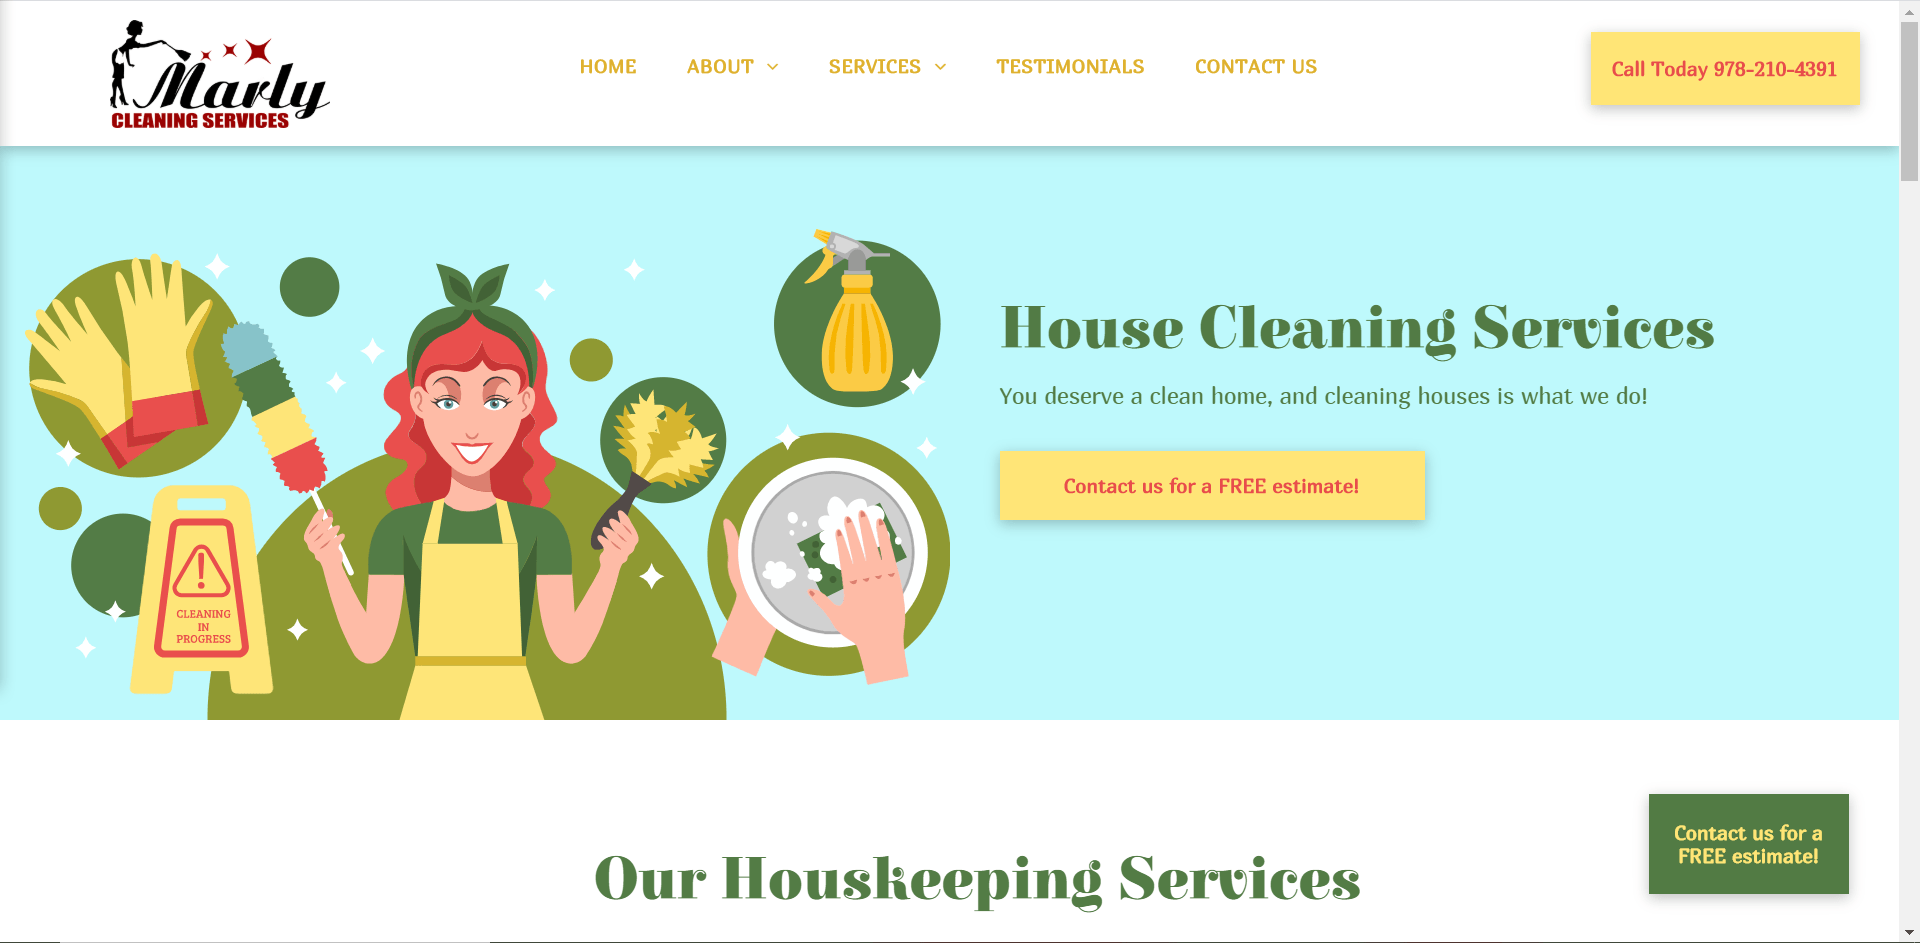 marly's cleaning services homepage